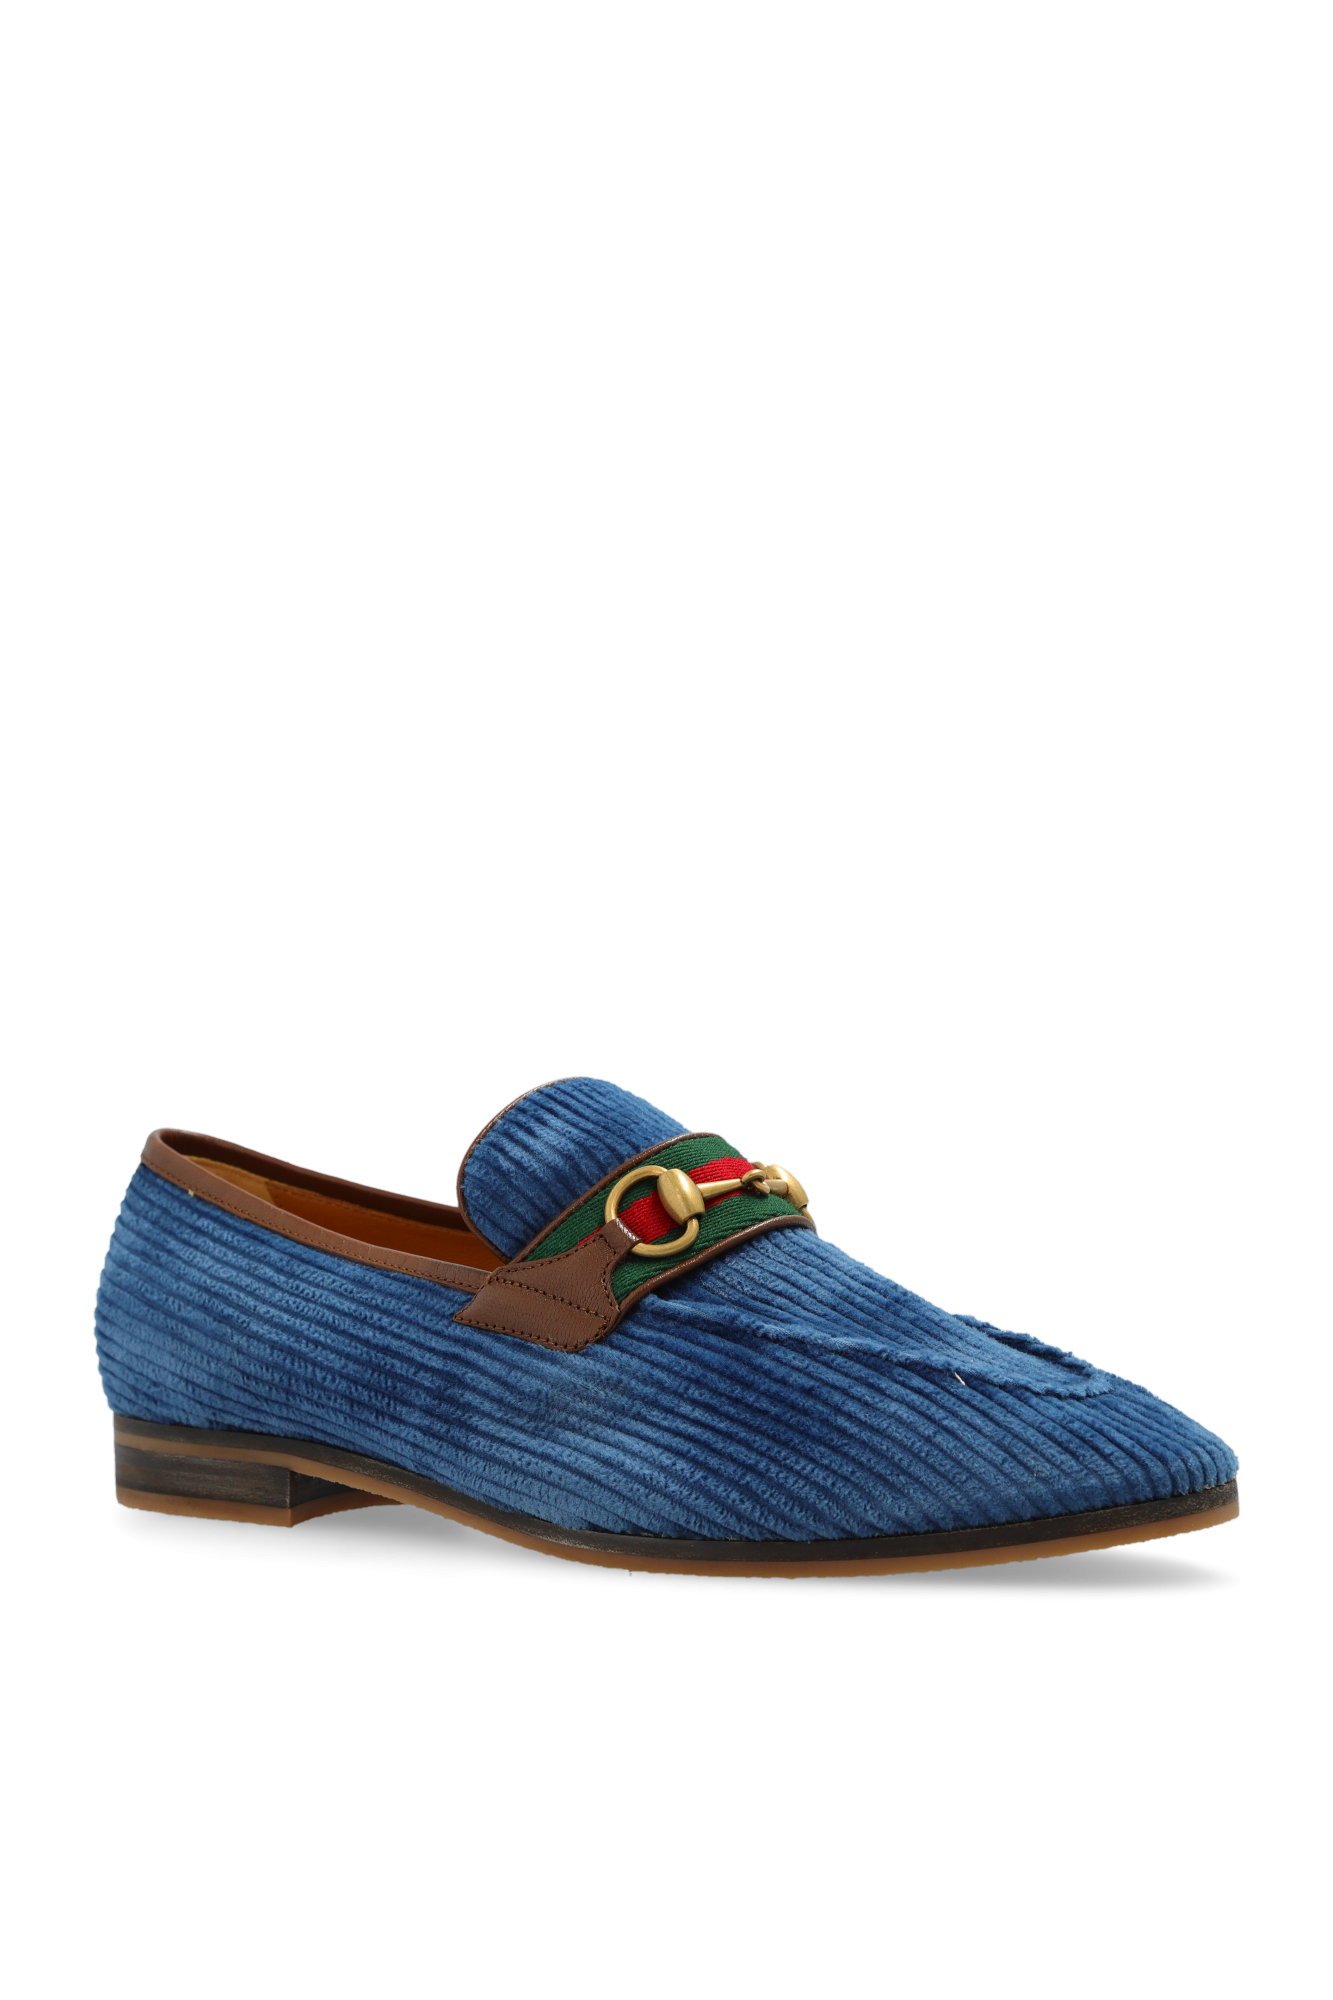 Gucci Marmont loafers